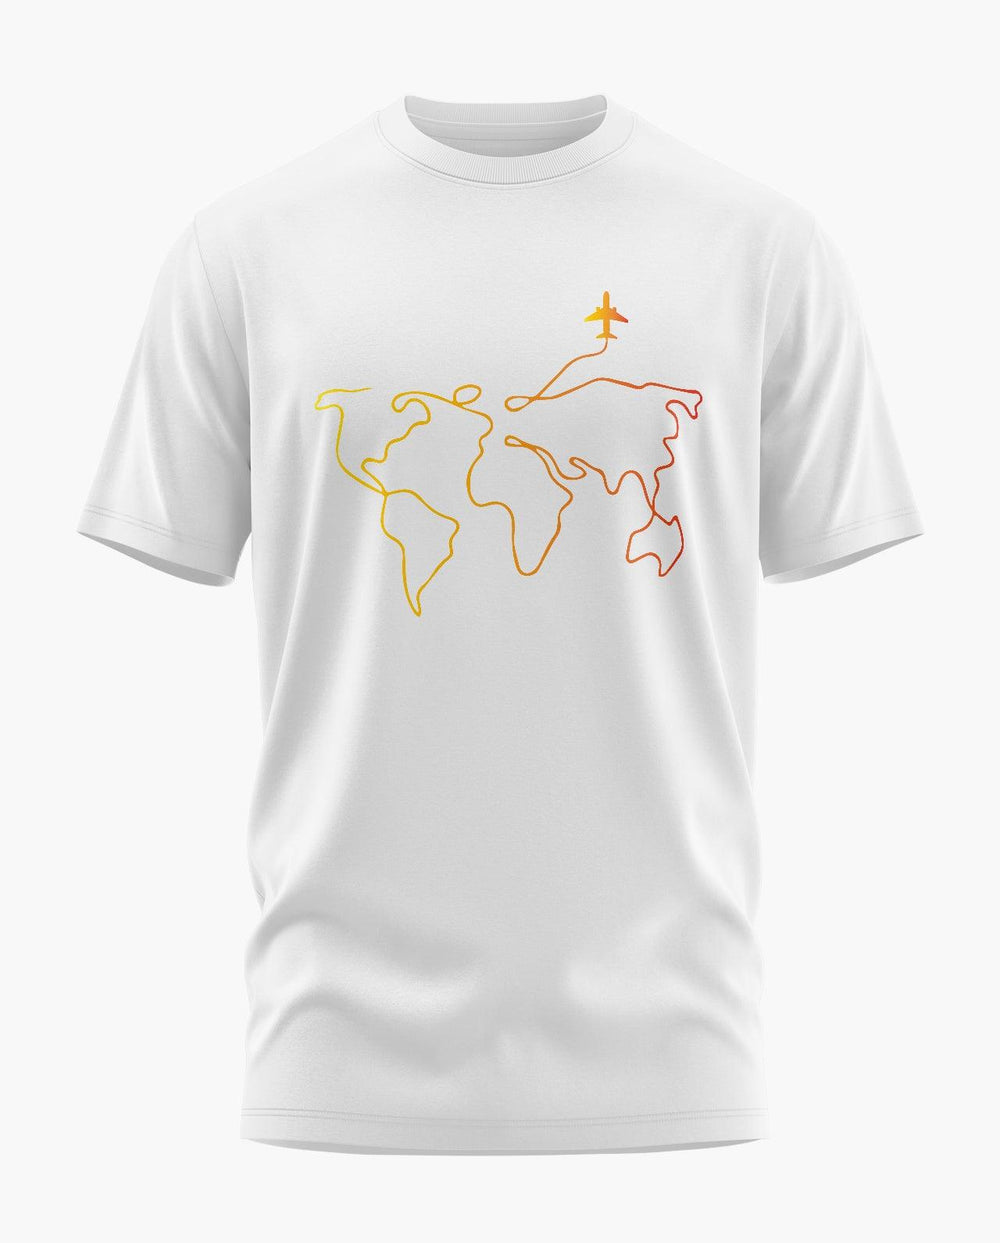 Travelling Around The Earth T-Shirt - Aero Armour